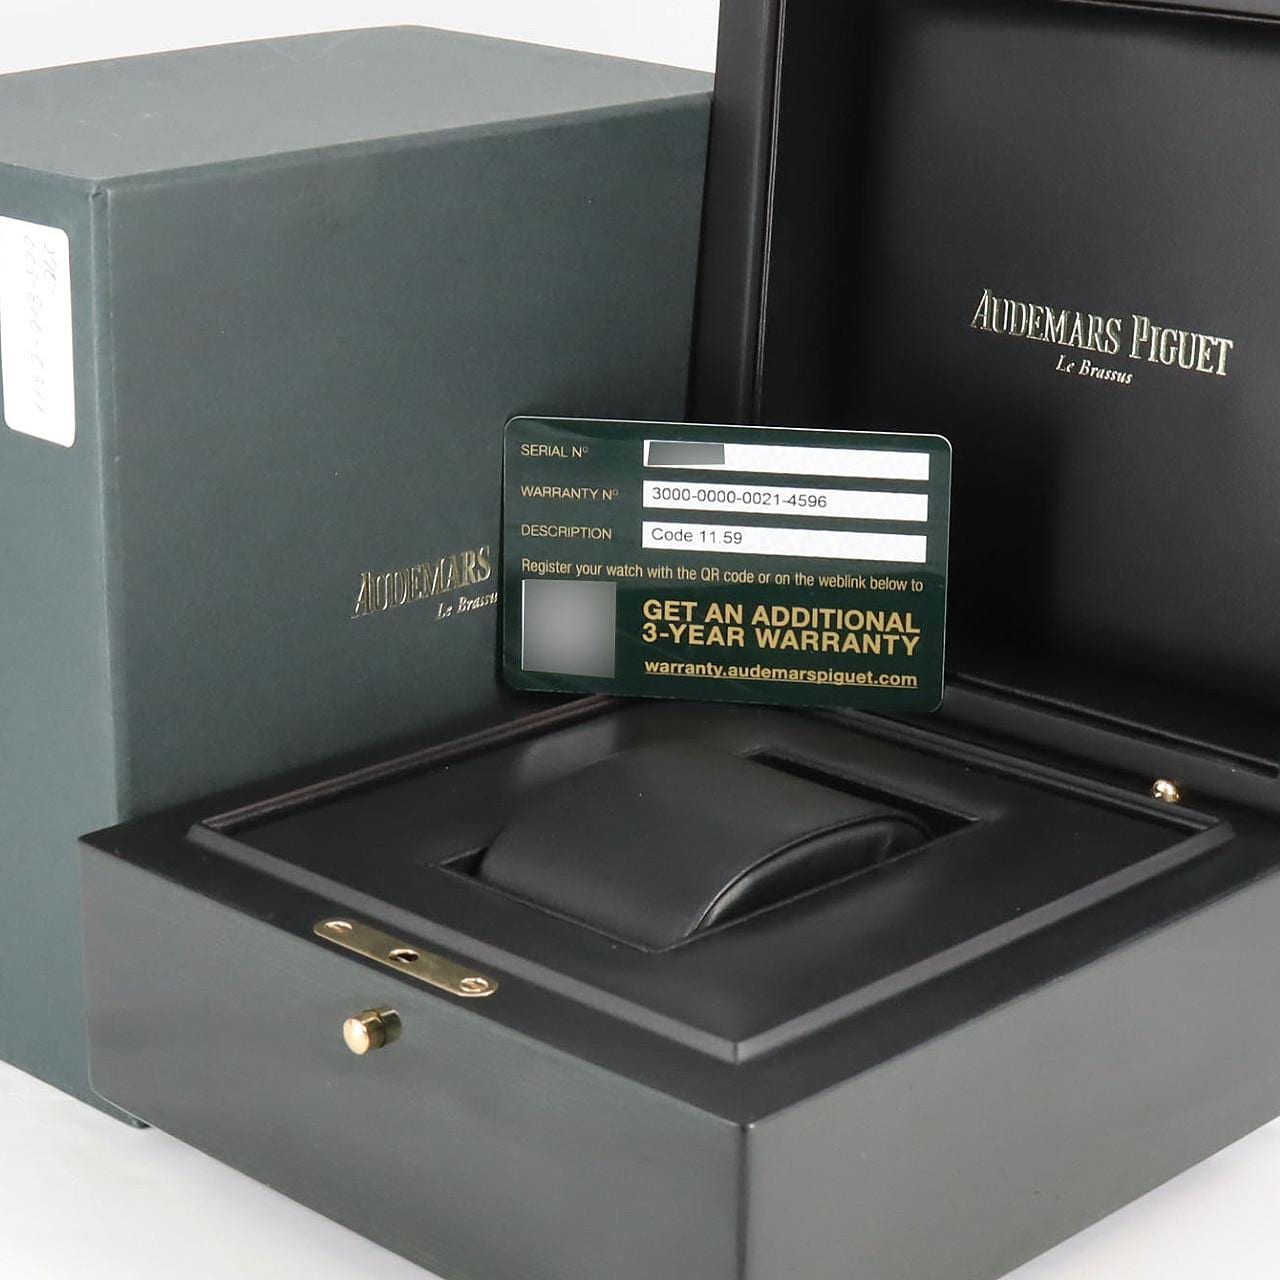 Audemars Piguet CODE11.59 Biode Macronograph PG 26393OR.OO.A002CR.01 PG/RG Automatic